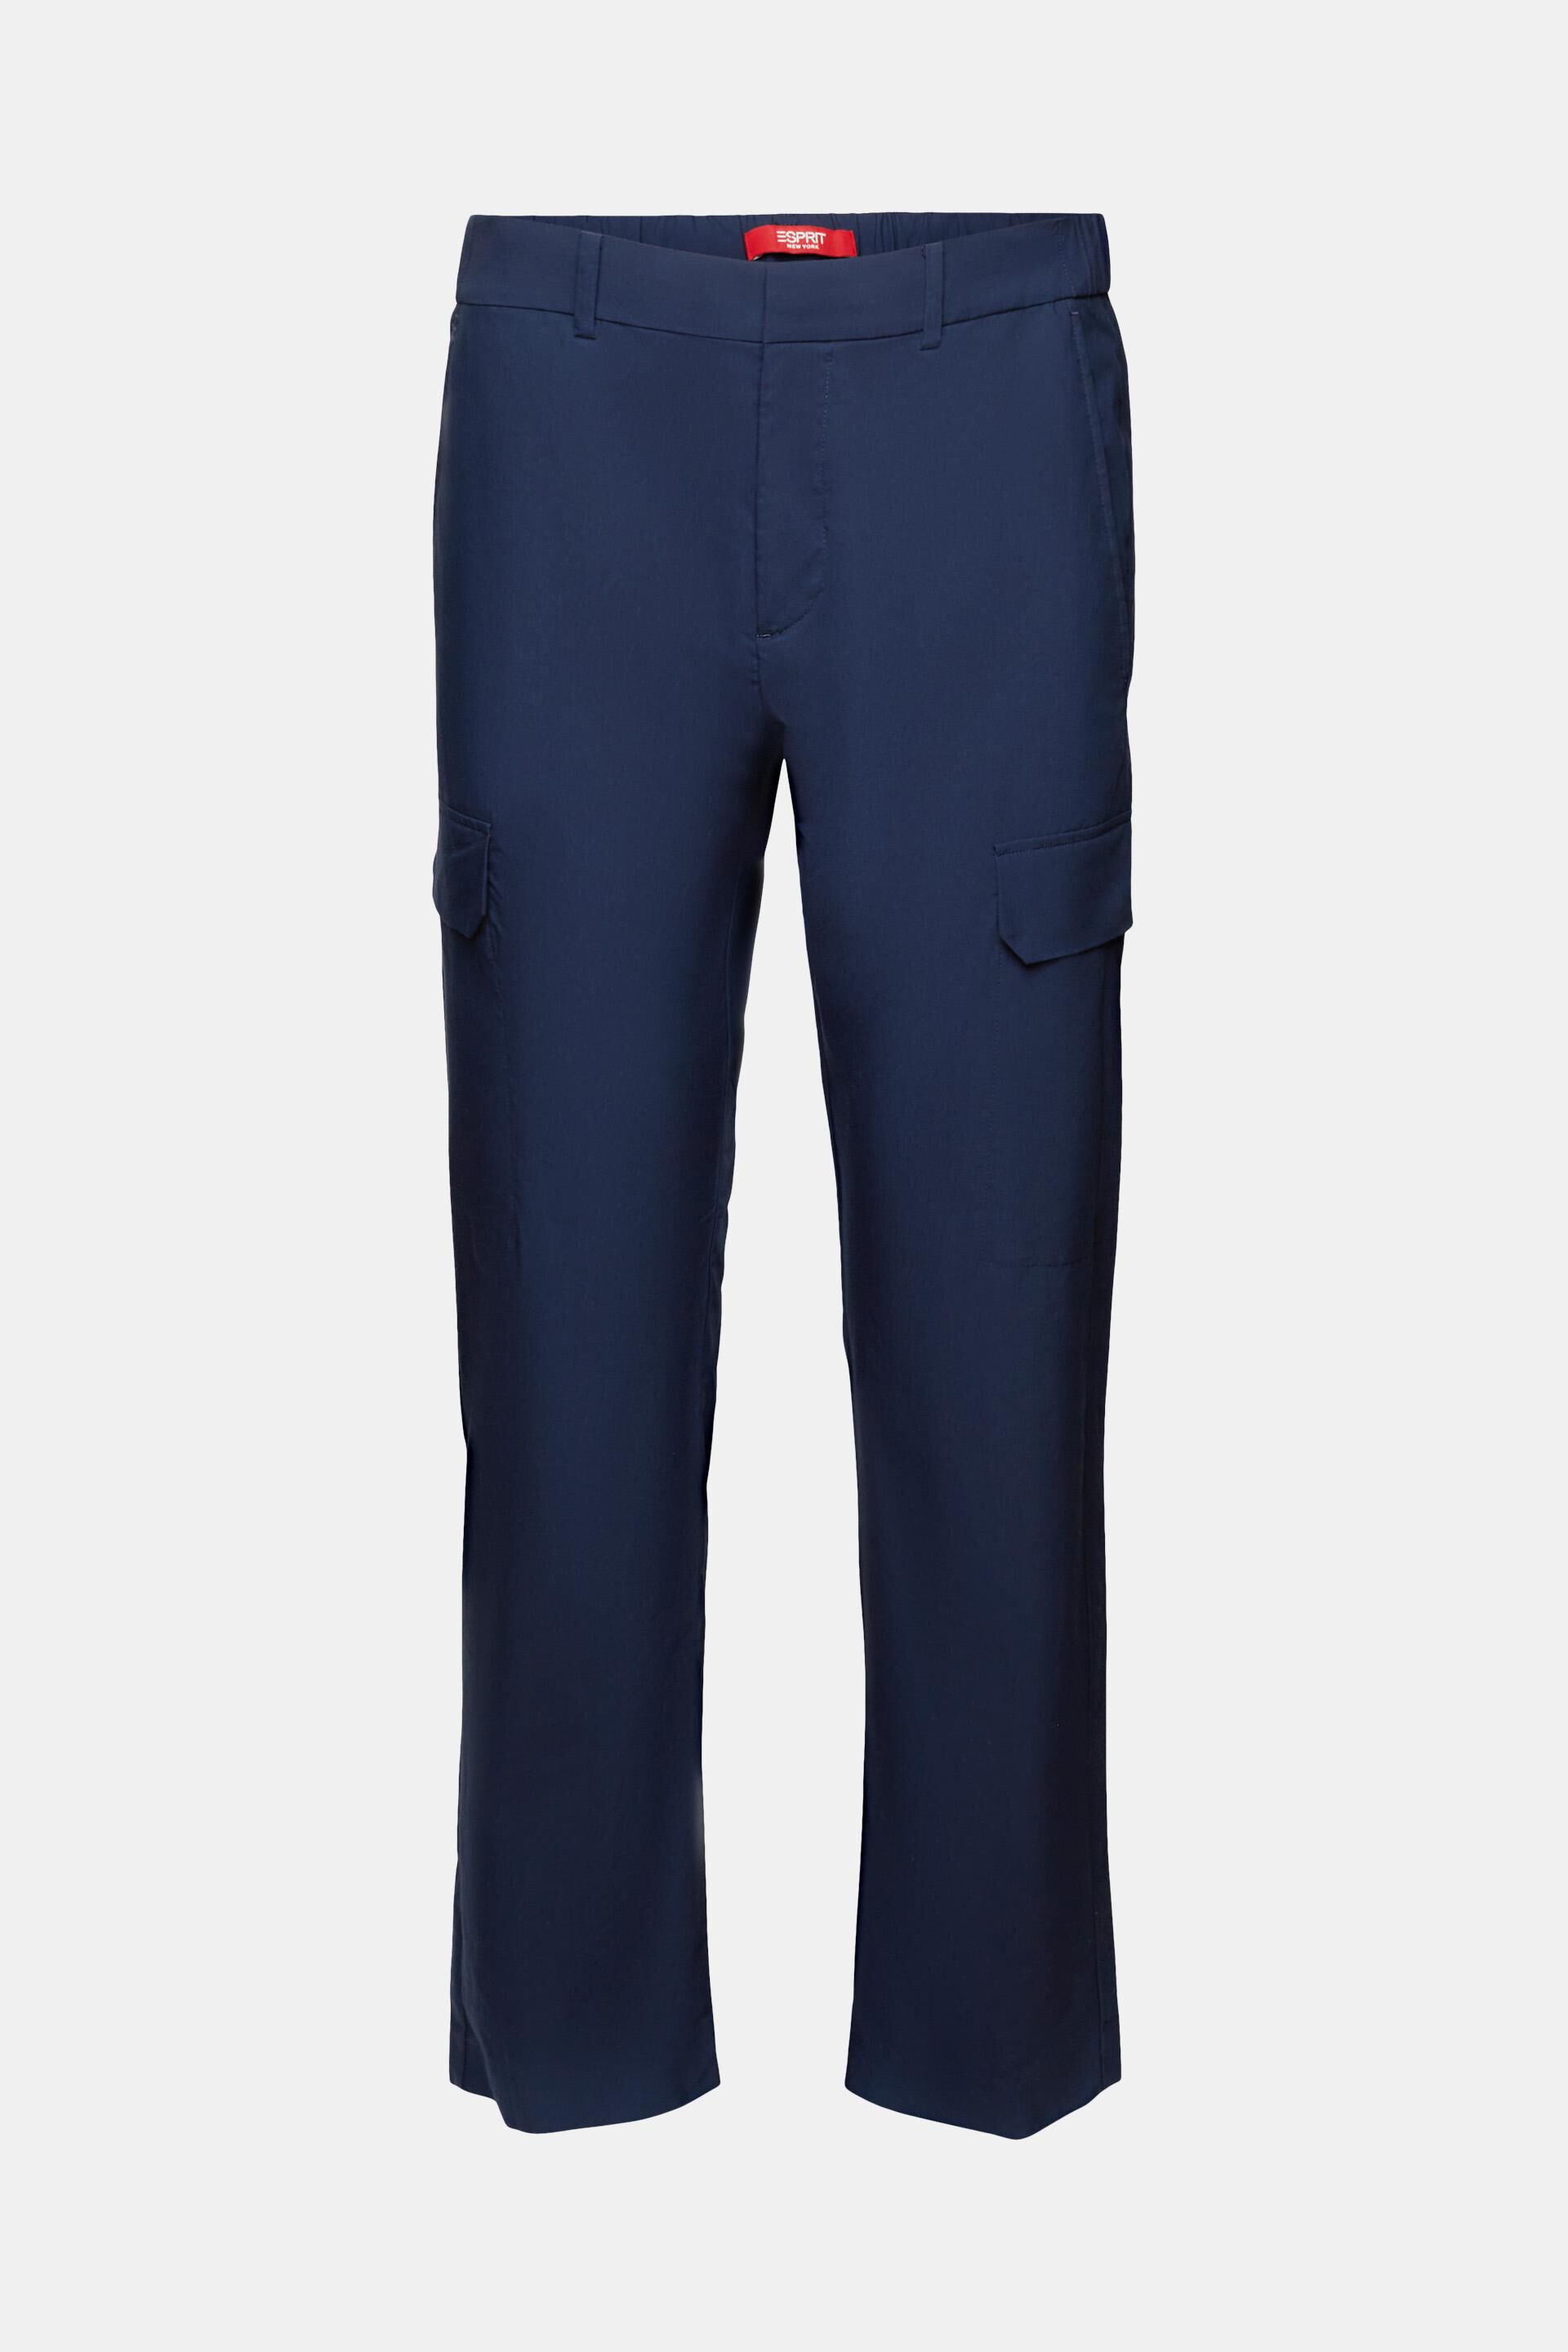 Navy Cotton Cuffed Cargo Trousers | New Look